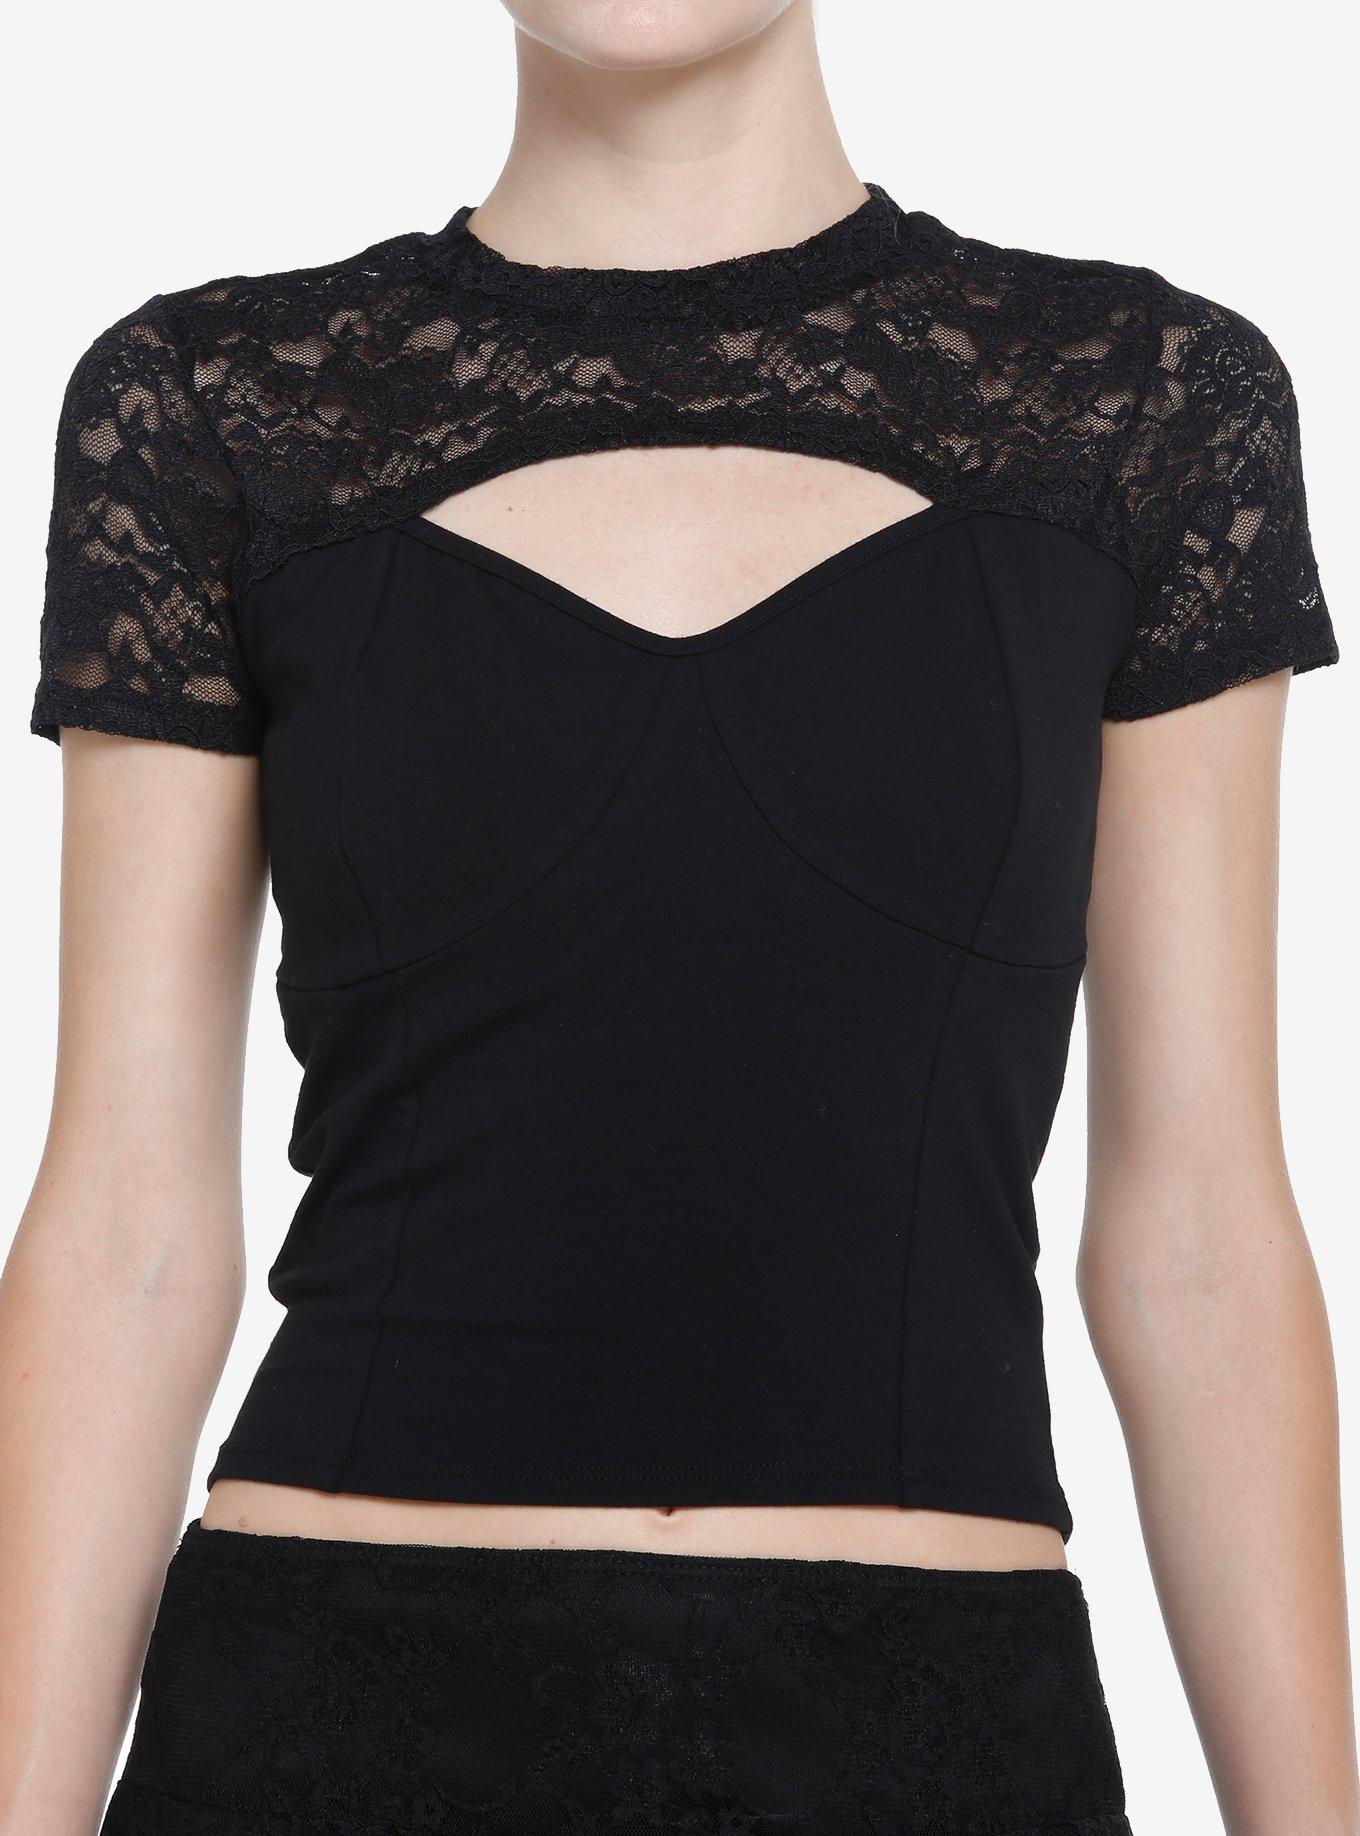 Thorn & Fable Black Lace Cutout Girls Top, ROSE, hi-res